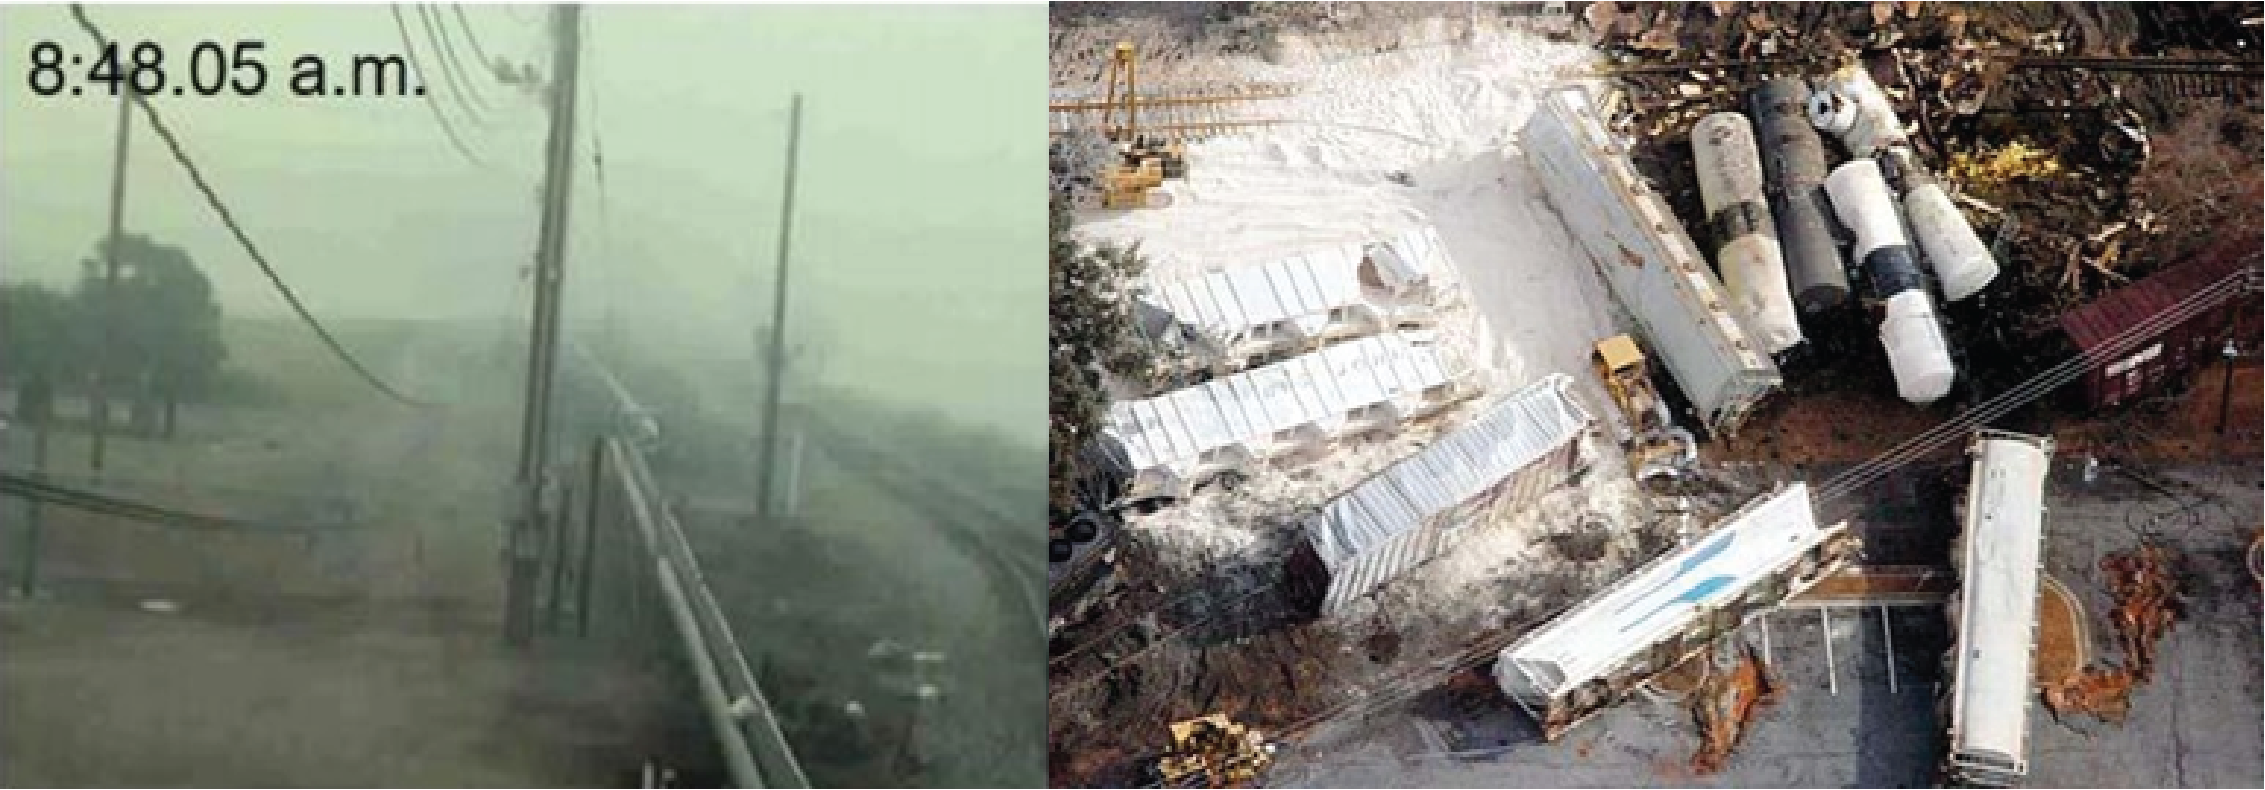 Figure 30: Recognition of a chemical incident can be slow and challenging without adequate detection systems. Left, chlorine cloud released by a rail accident during the day. Right, rail accident that released chlorine during the night.